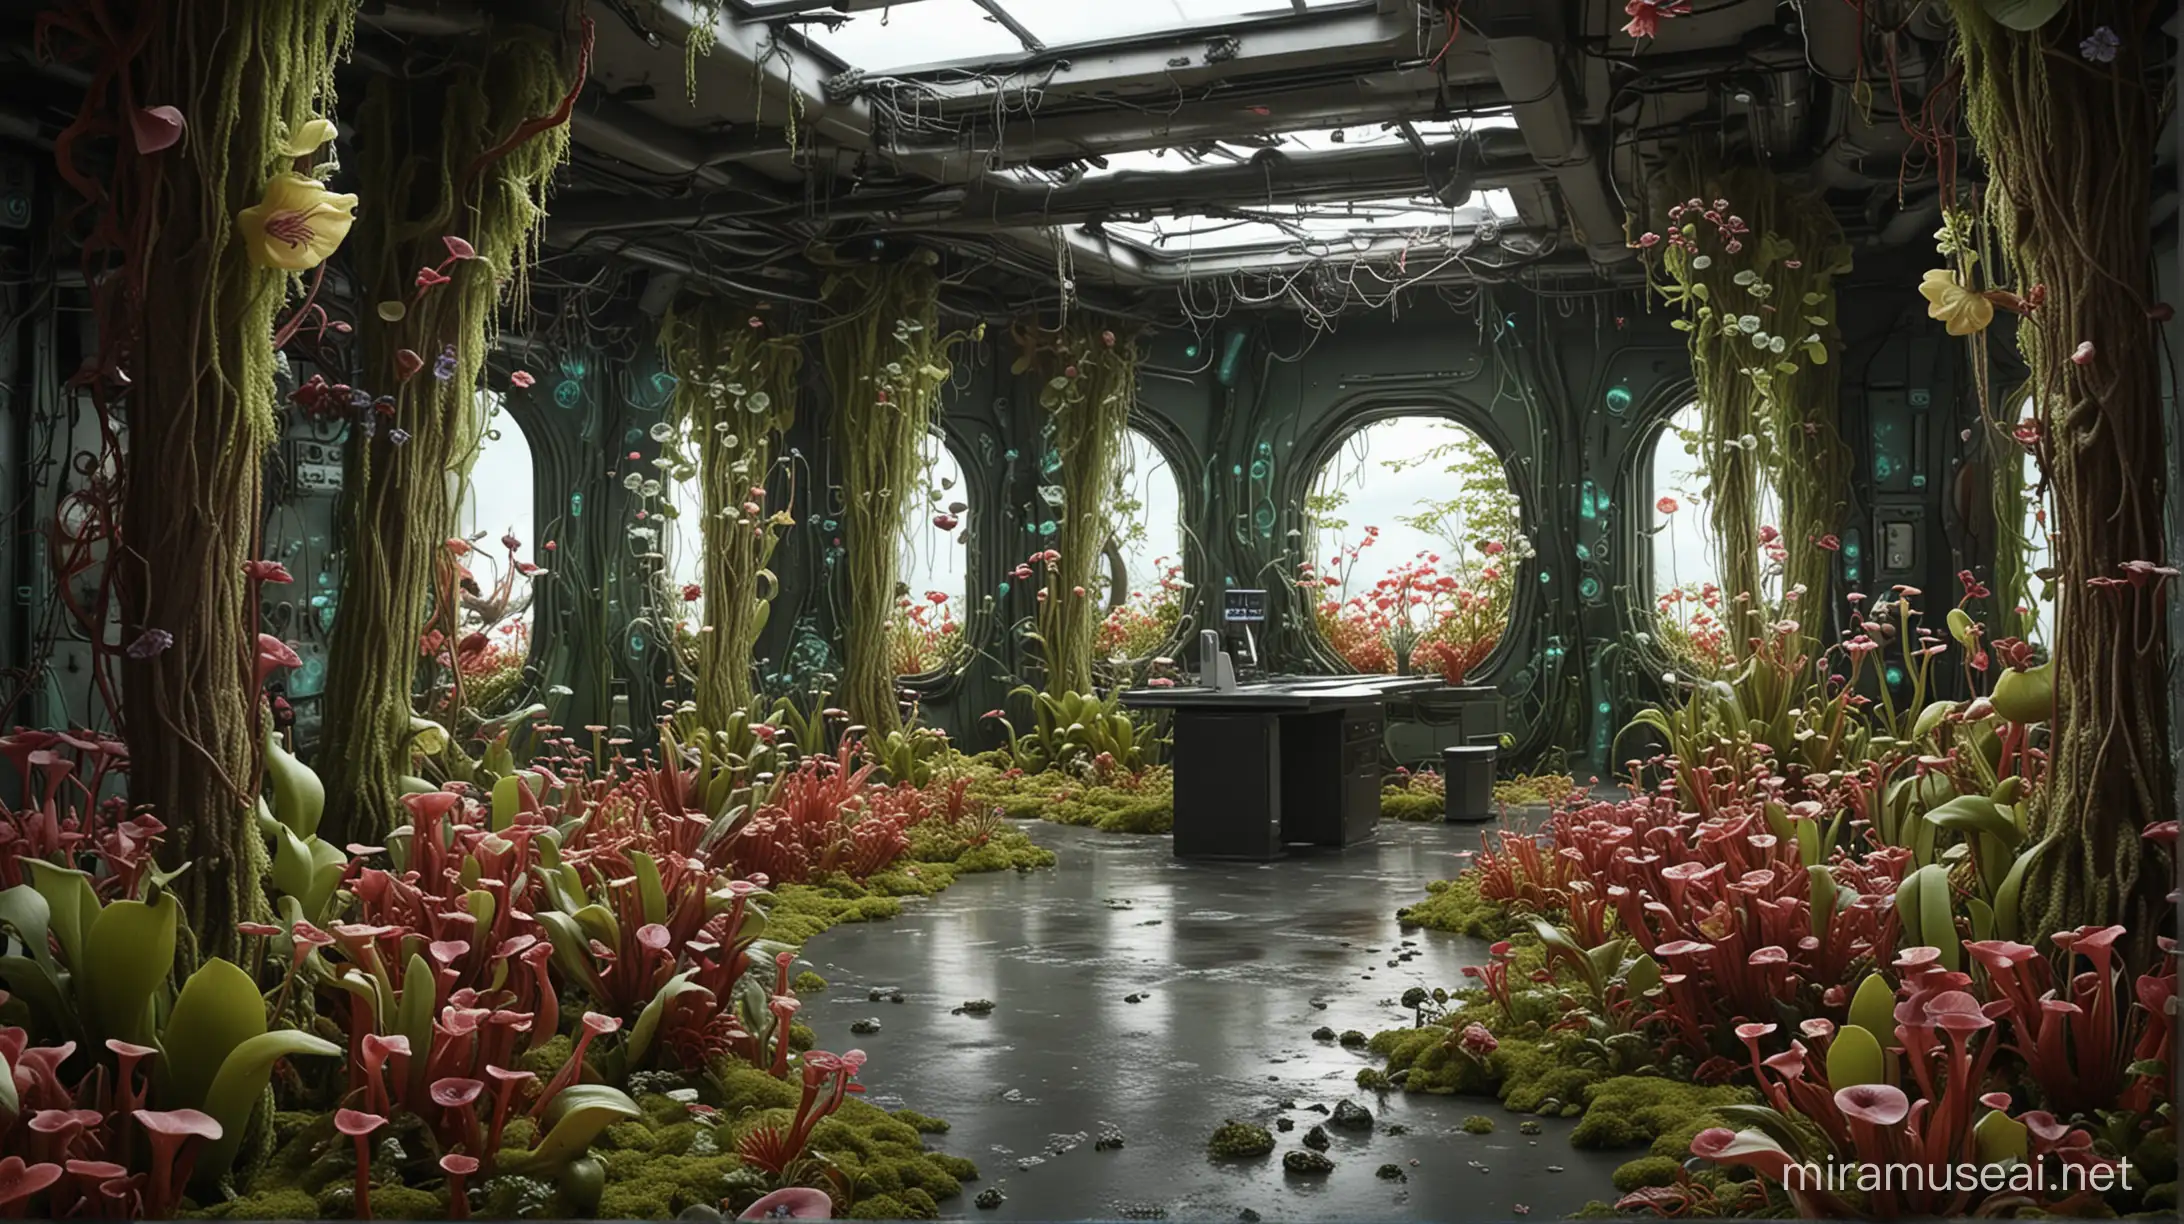 Futuristic Interior Space with Carnivorous Plants and Flowers by Squidward Tentacles